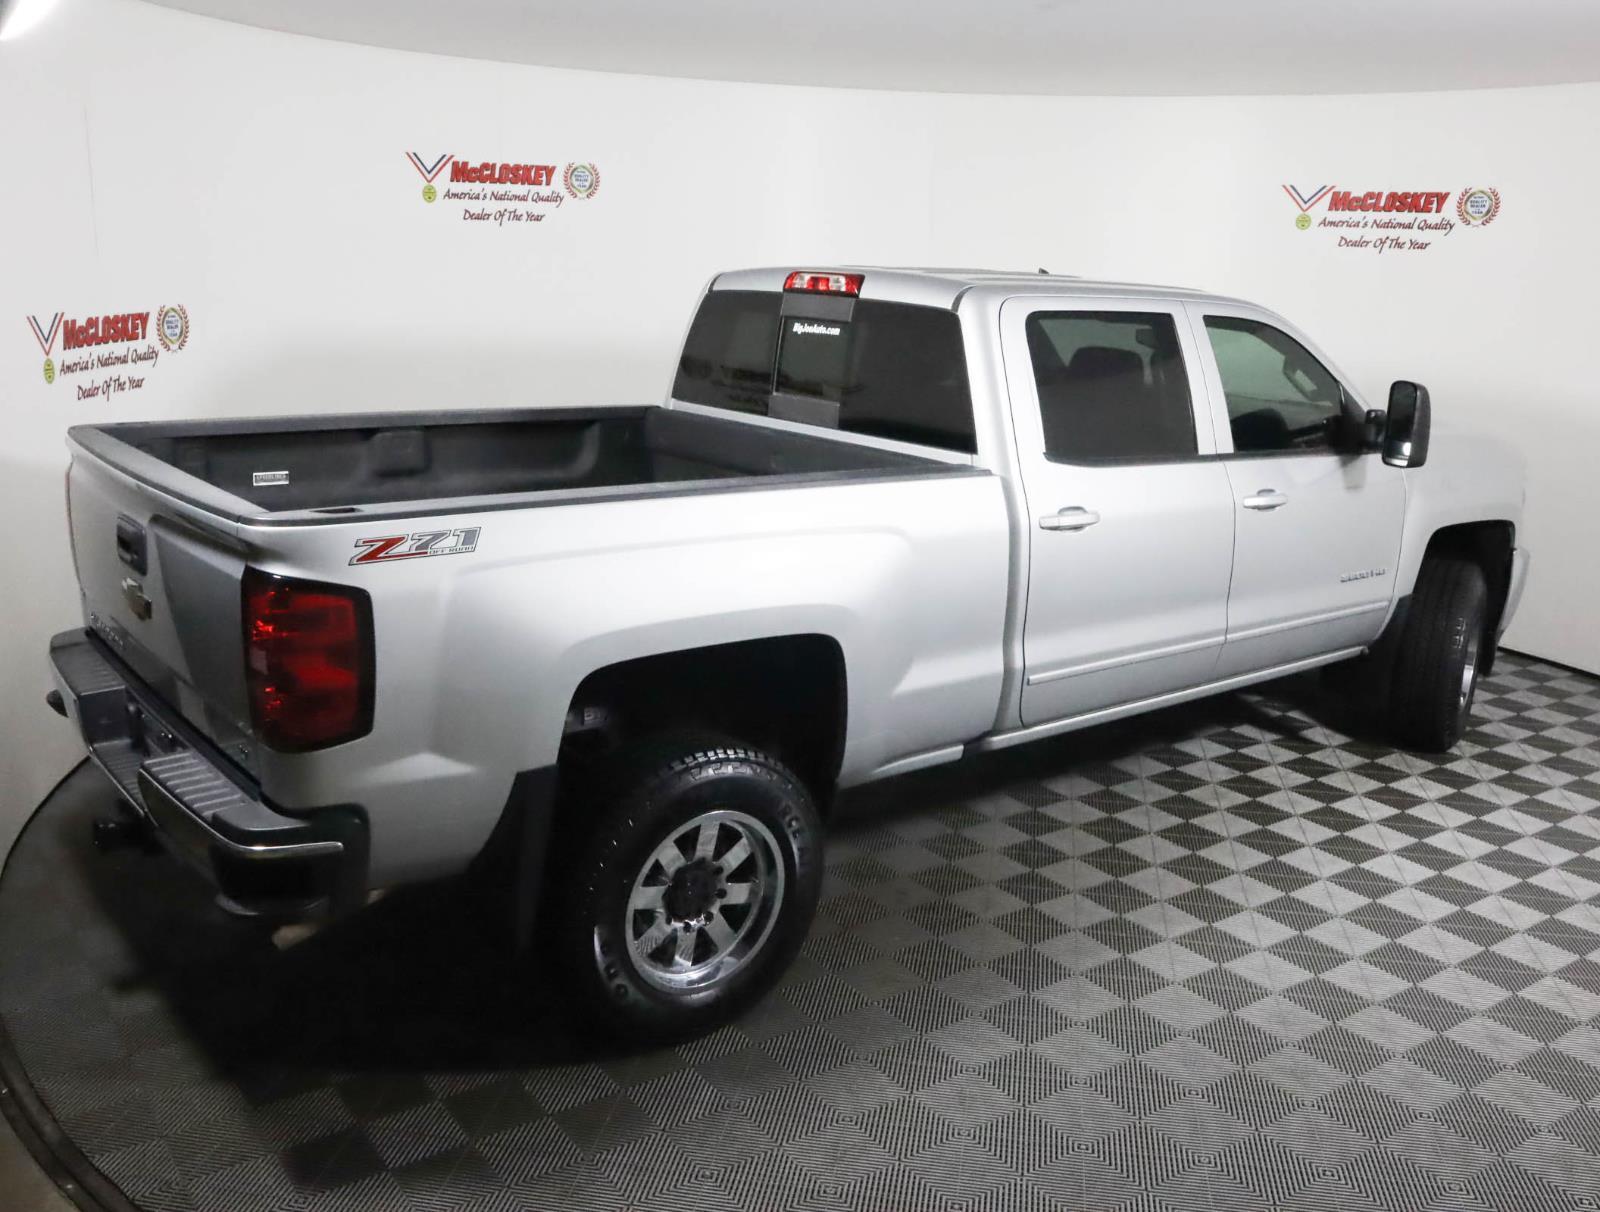 Preowned 2017 Chevrolet Silverado LT Z71 for sale by McCloskey Imports & 4X4's in Colorado Springs, CO